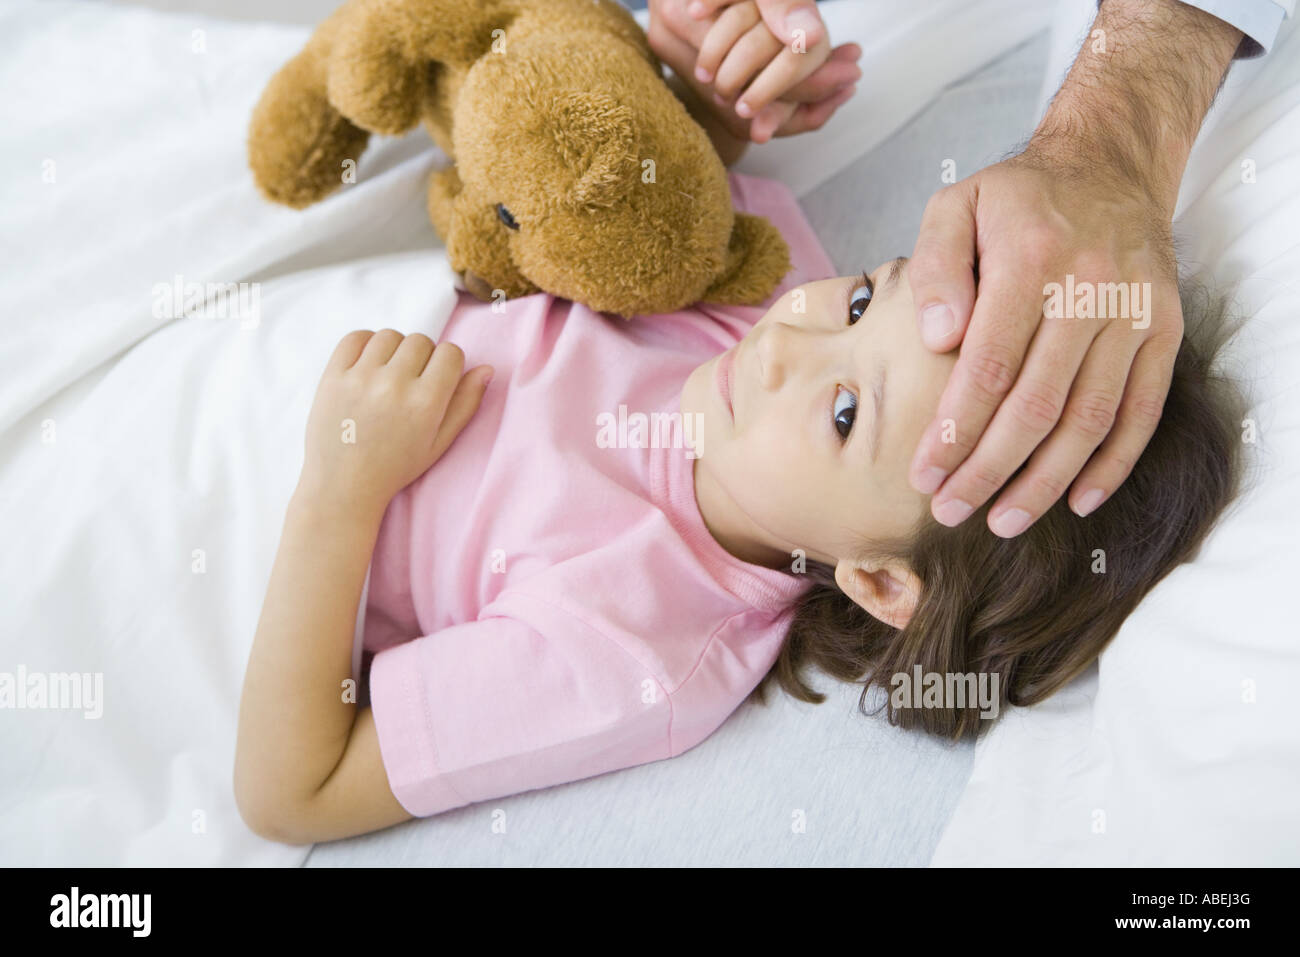 Girl lying in bed with teddy bear, man holding her hand on putting other hand on her forehead Stock Photo